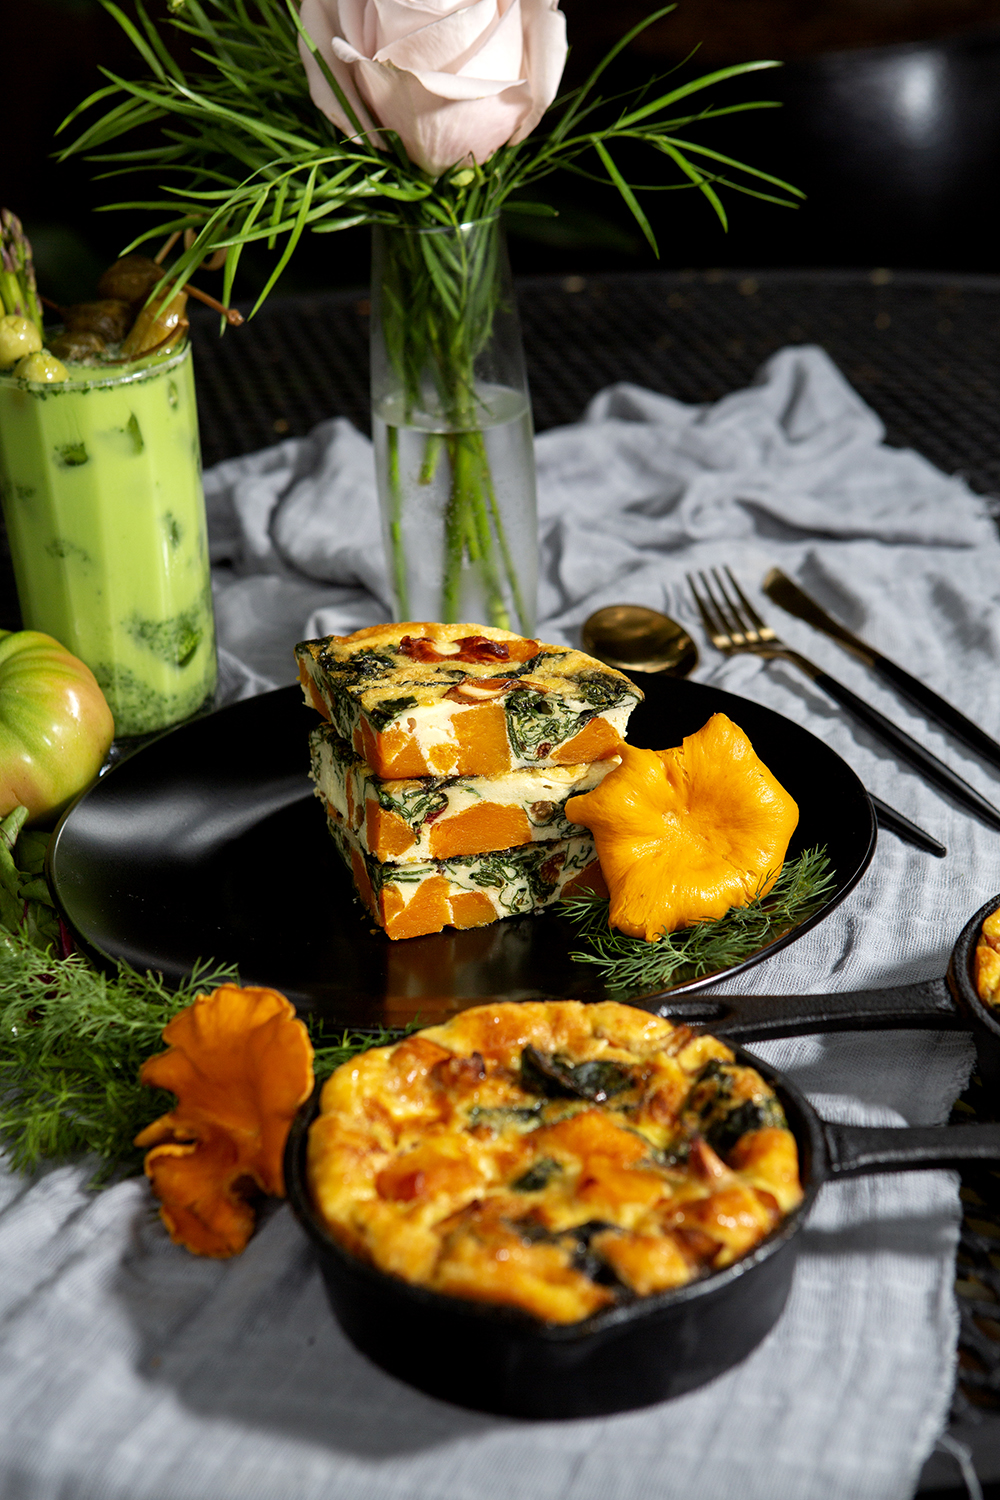 Served in miniature cast iron pans, enjoy a frittata made with sweet potato, spinach and roasted tomatoes. Enjoy with a Green Tomato Bloody Mary.